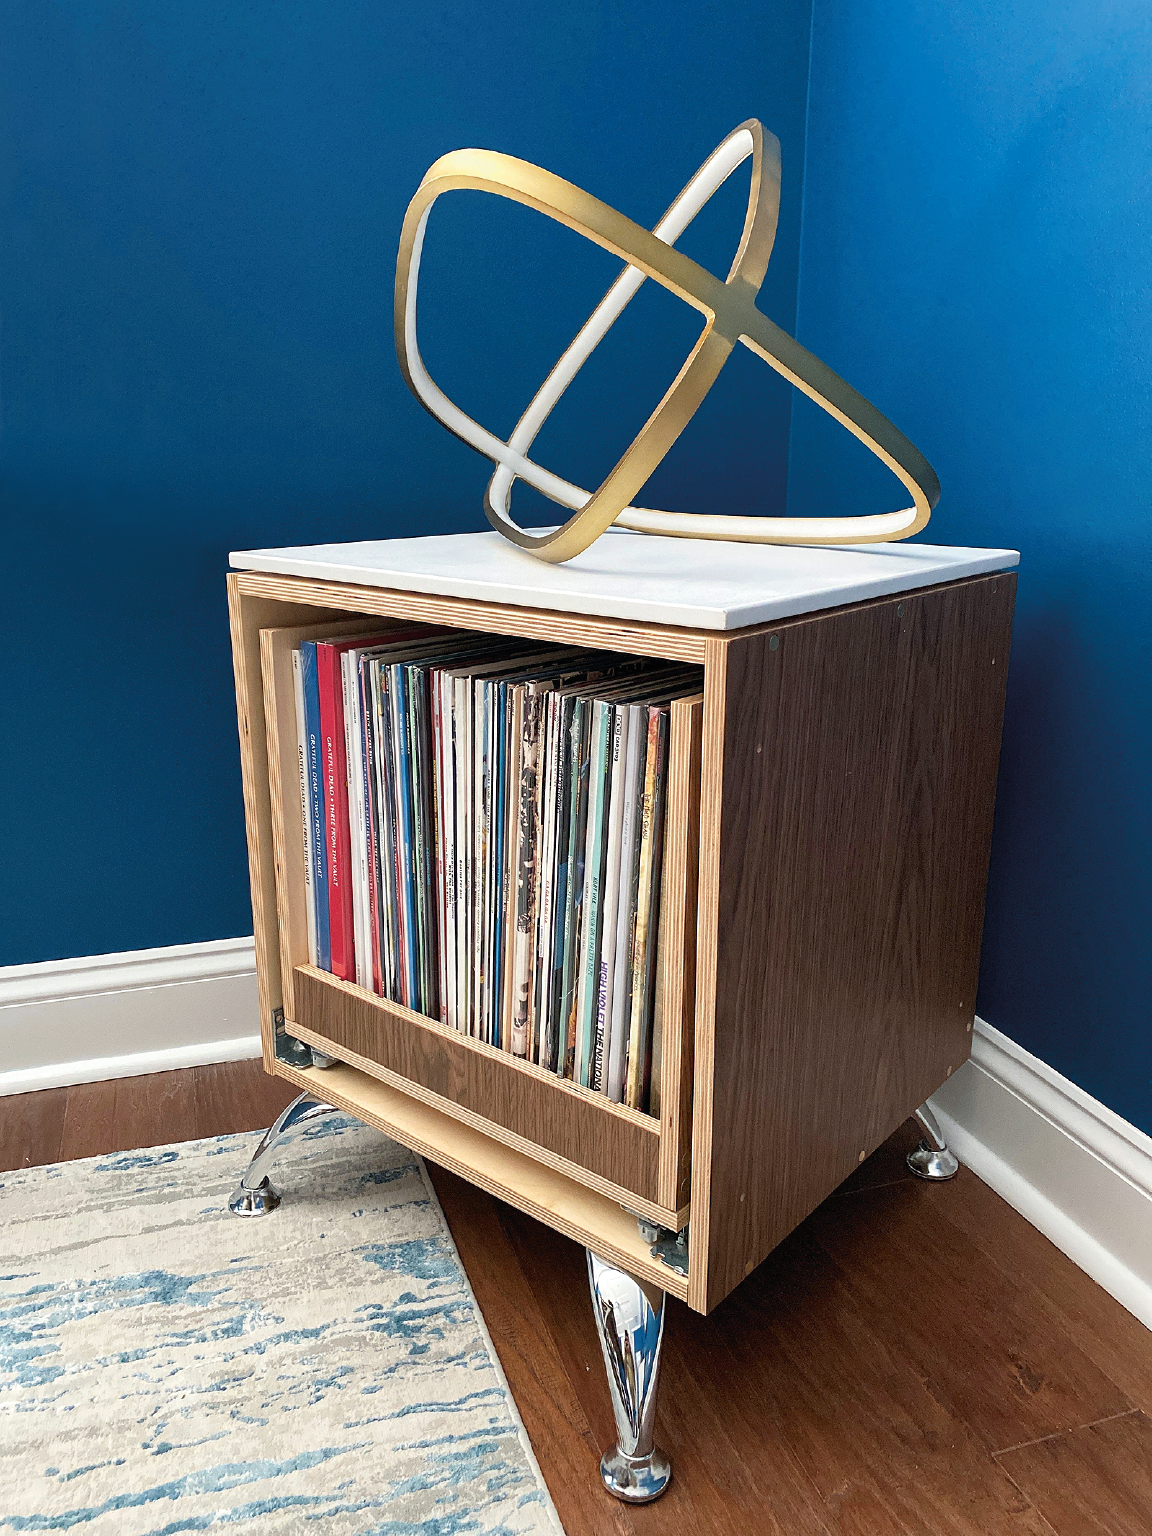 The Chelle Vinyl Cube by Form & Finish, shown here in walnut, comes with a removable storage crate that glides thanks to soft close undermount drawer slides. The cube features integral grommeted cord management and is customizable, 24 x 19 x 20.5 in.